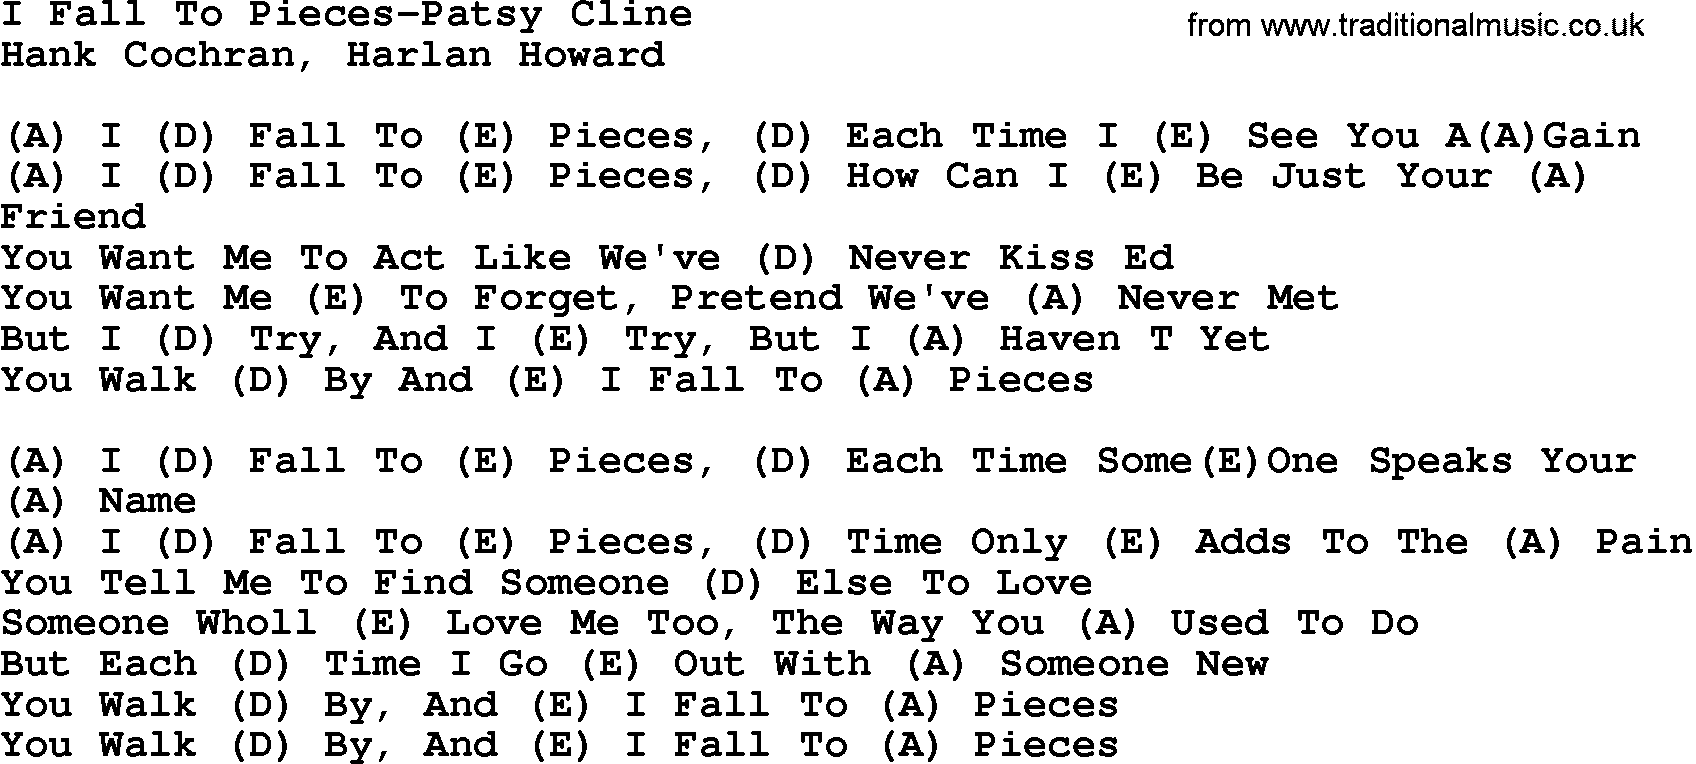 Country music song: I Fall To Pieces-Patsy Cline lyrics and chords